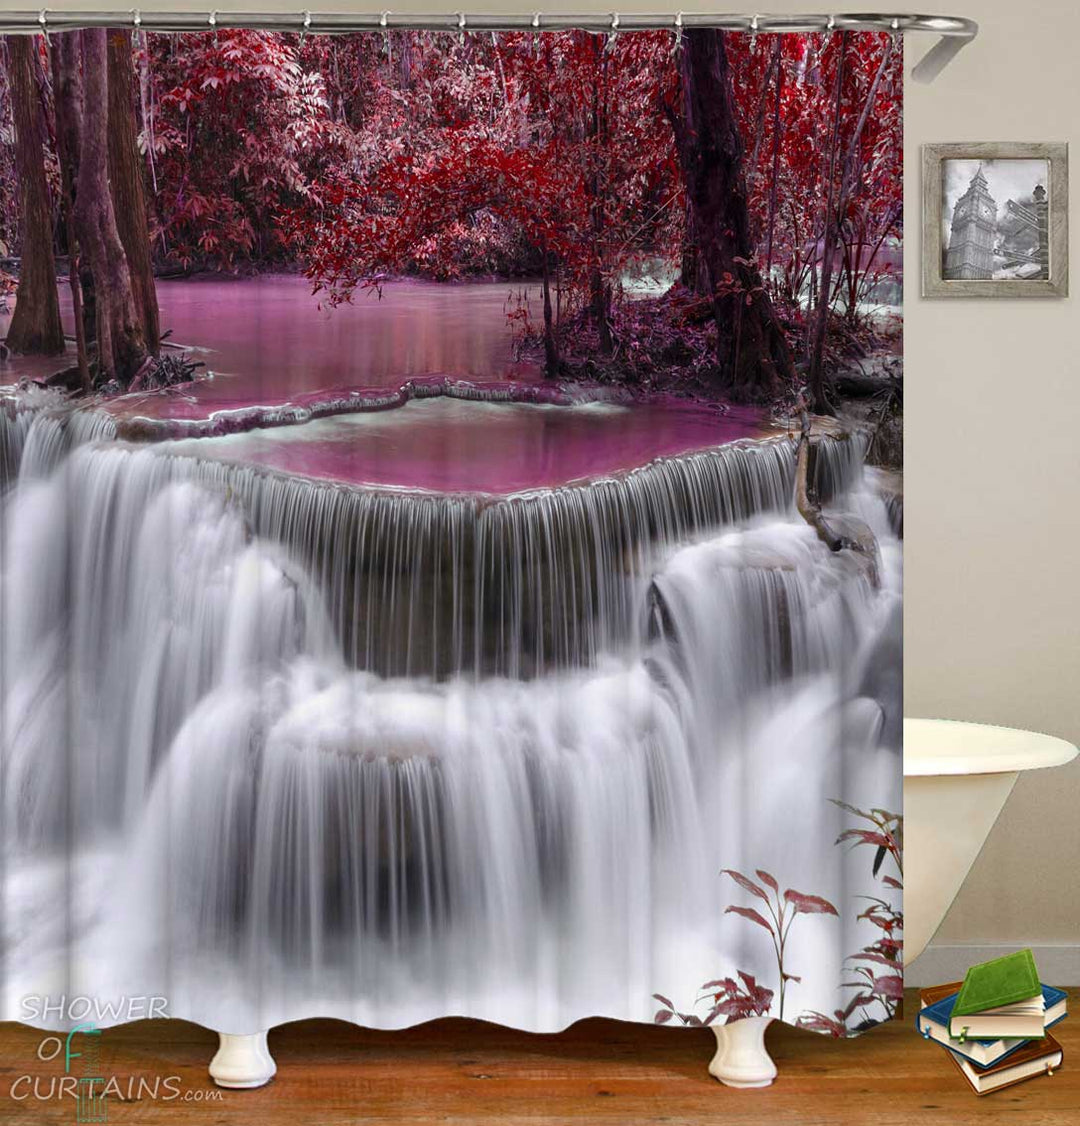 Shower Curtains with Red Nature and Purple Waterfalls